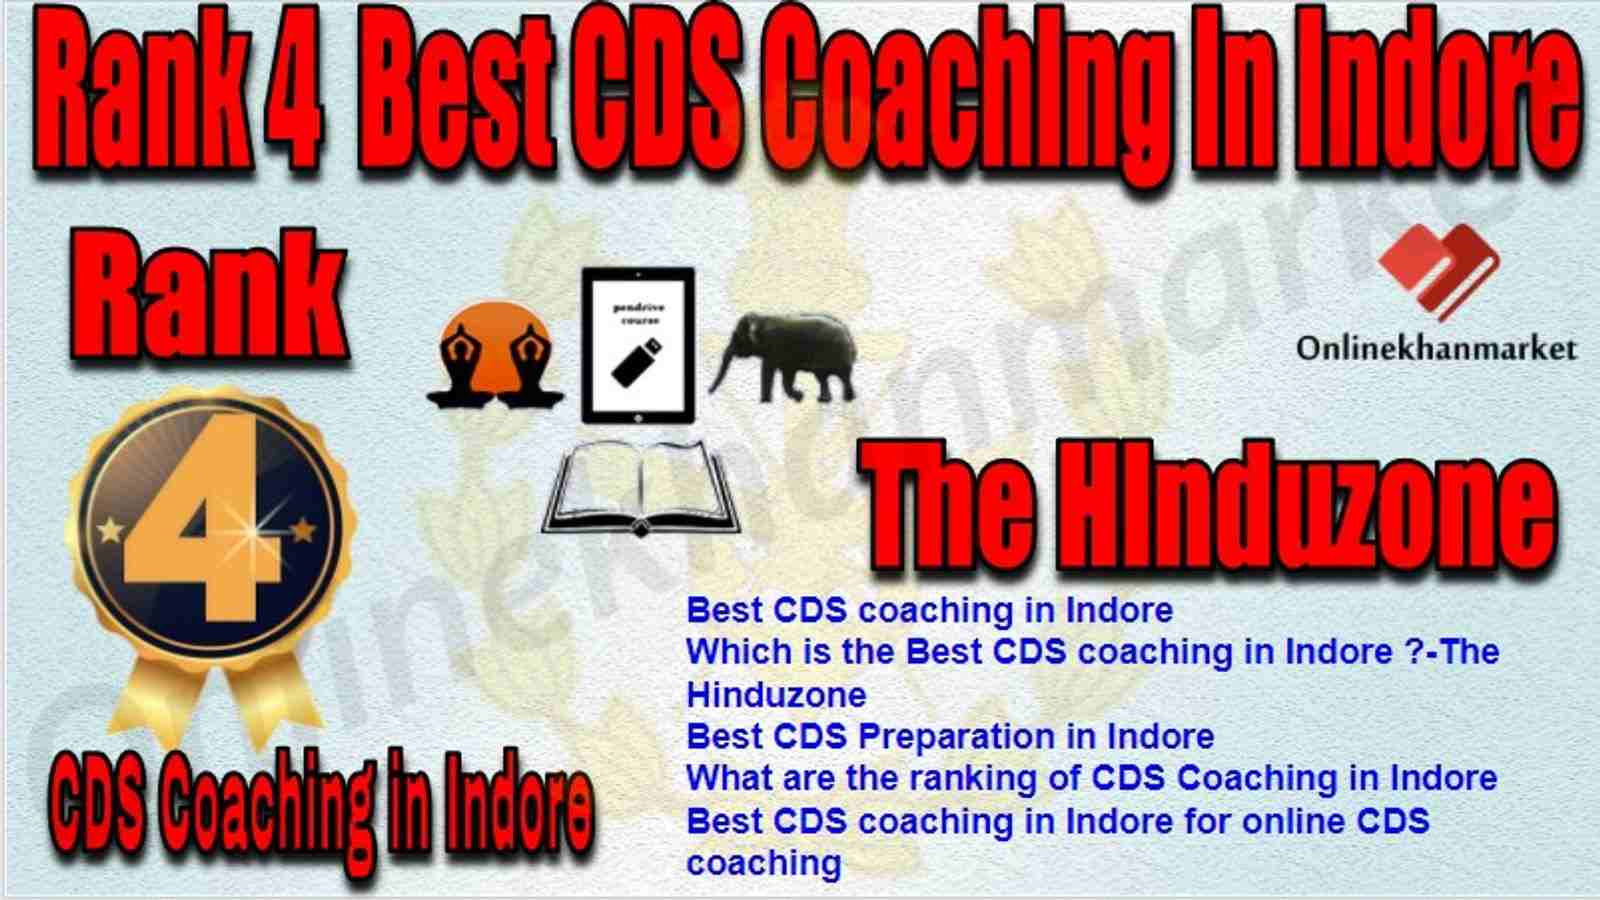 Rank 4 Best CDS Coaching in indore